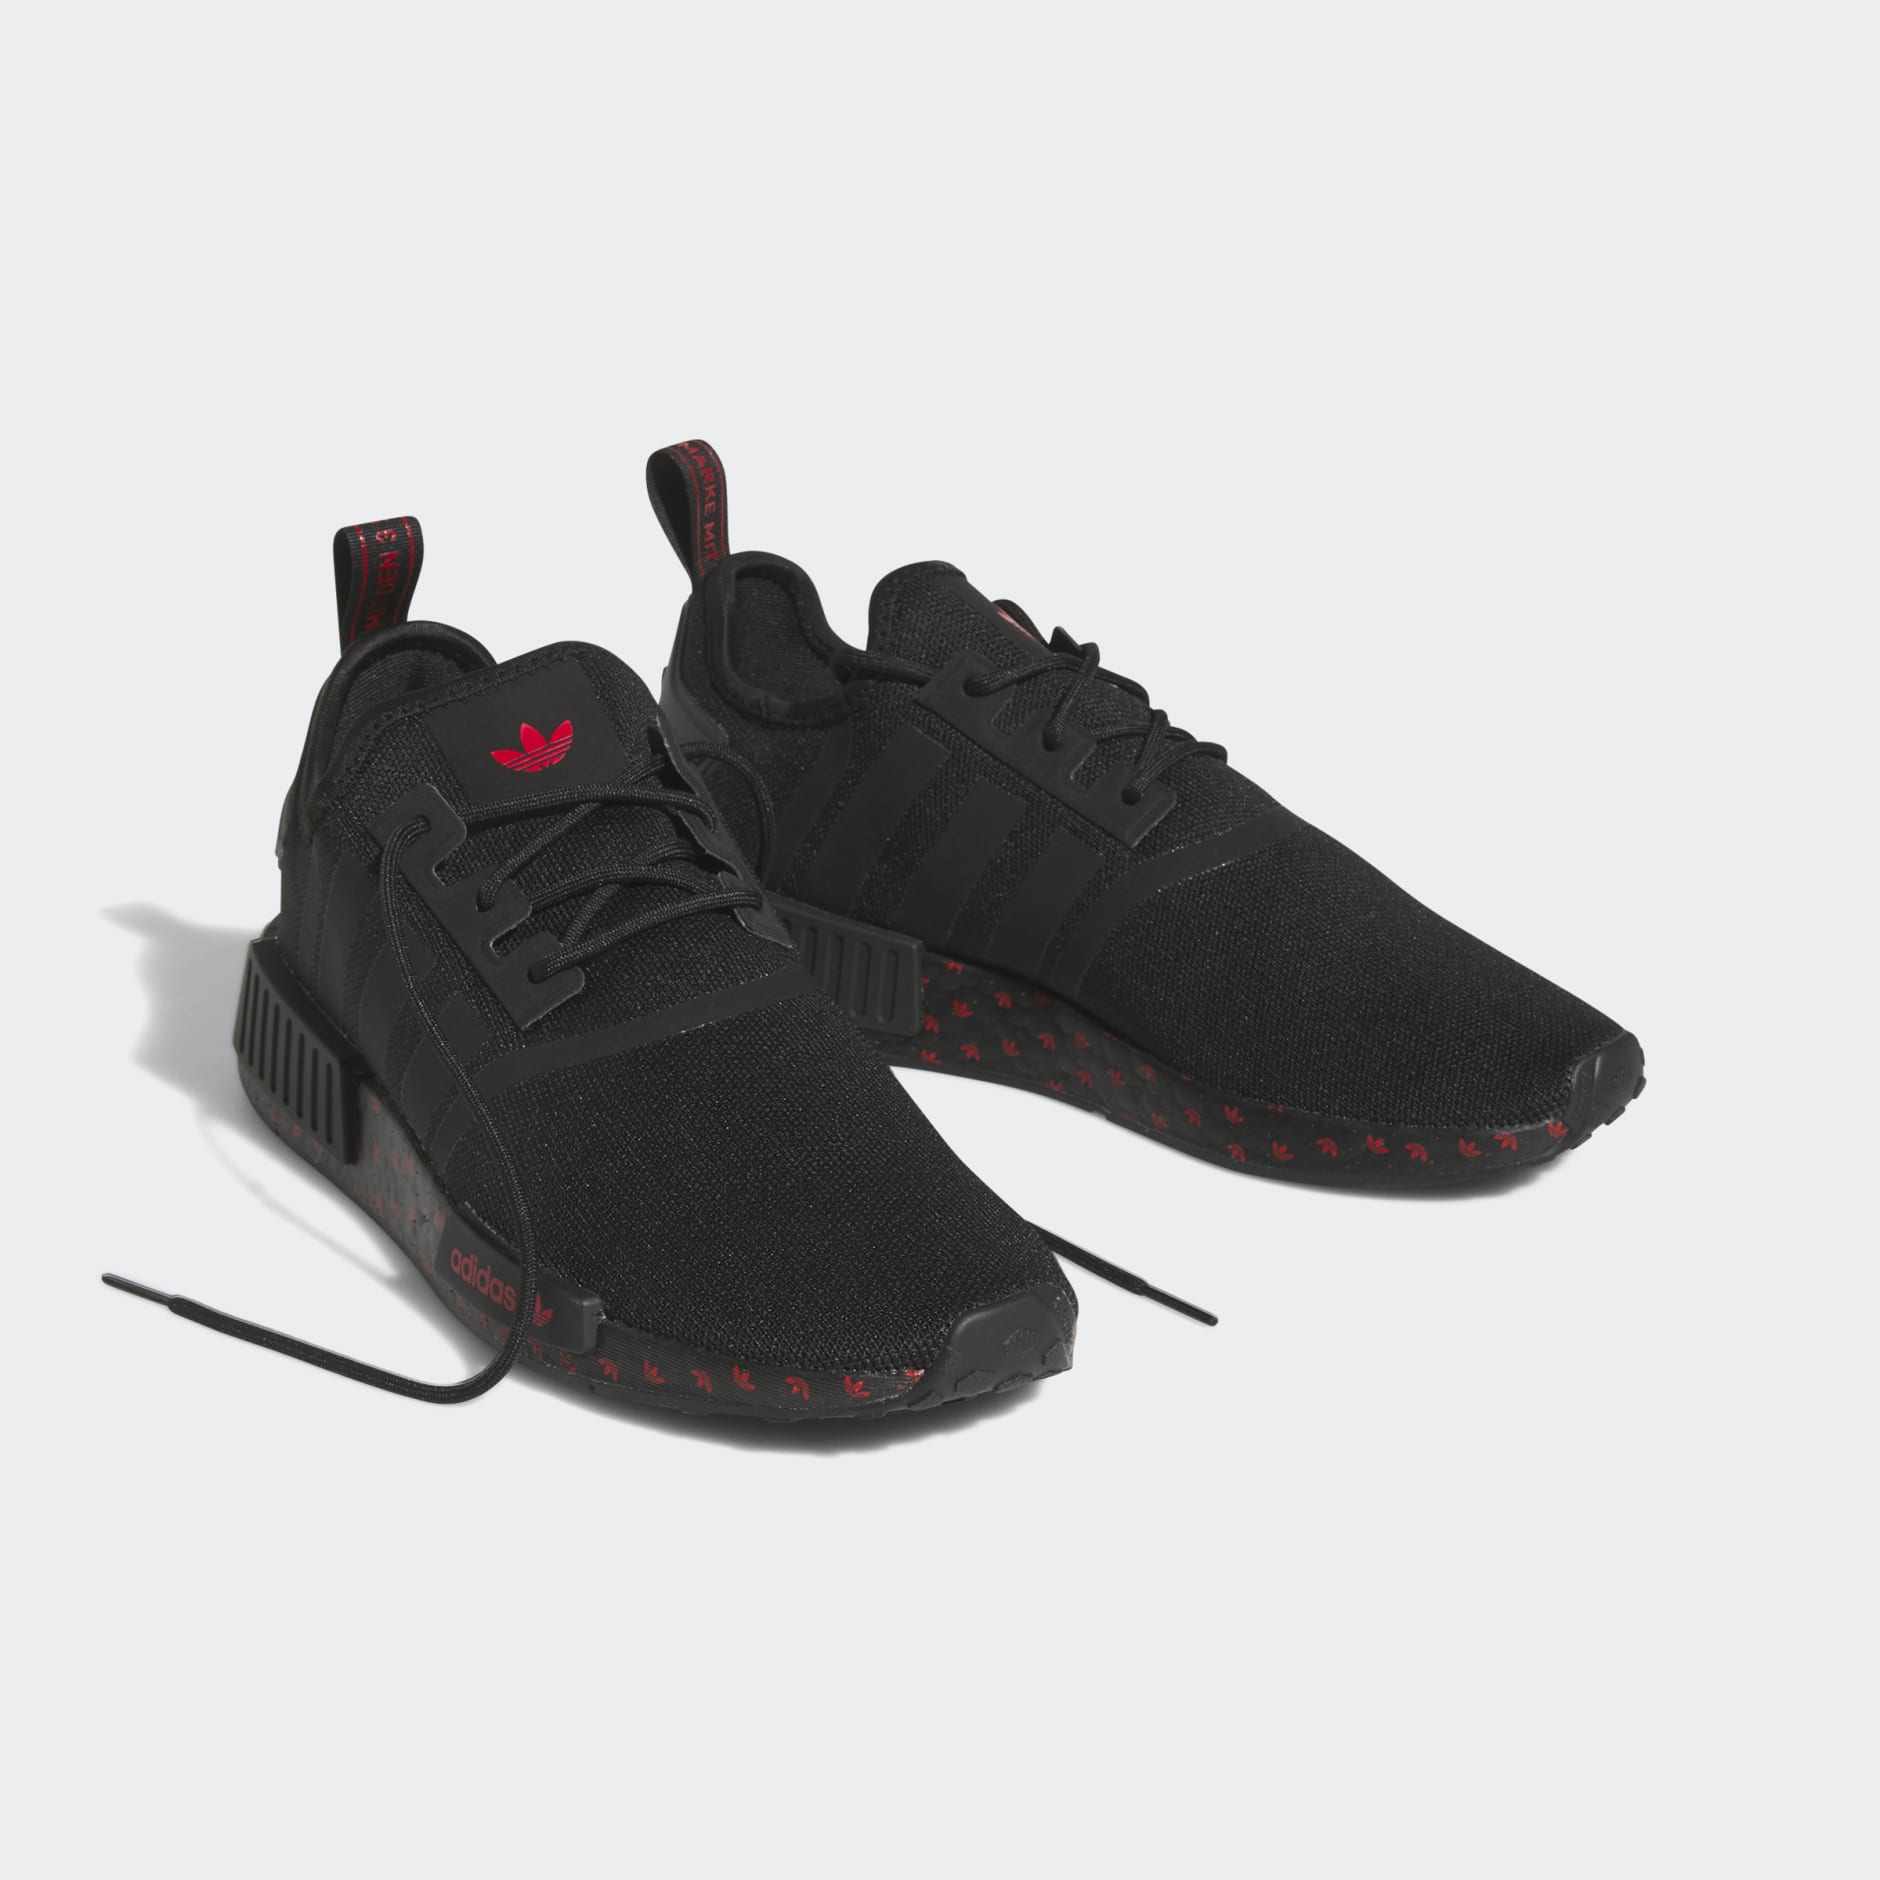 Wreed Tot ziens Reiziger Men's Shoes - NMD_R1 Shoes - Black | adidas Oman